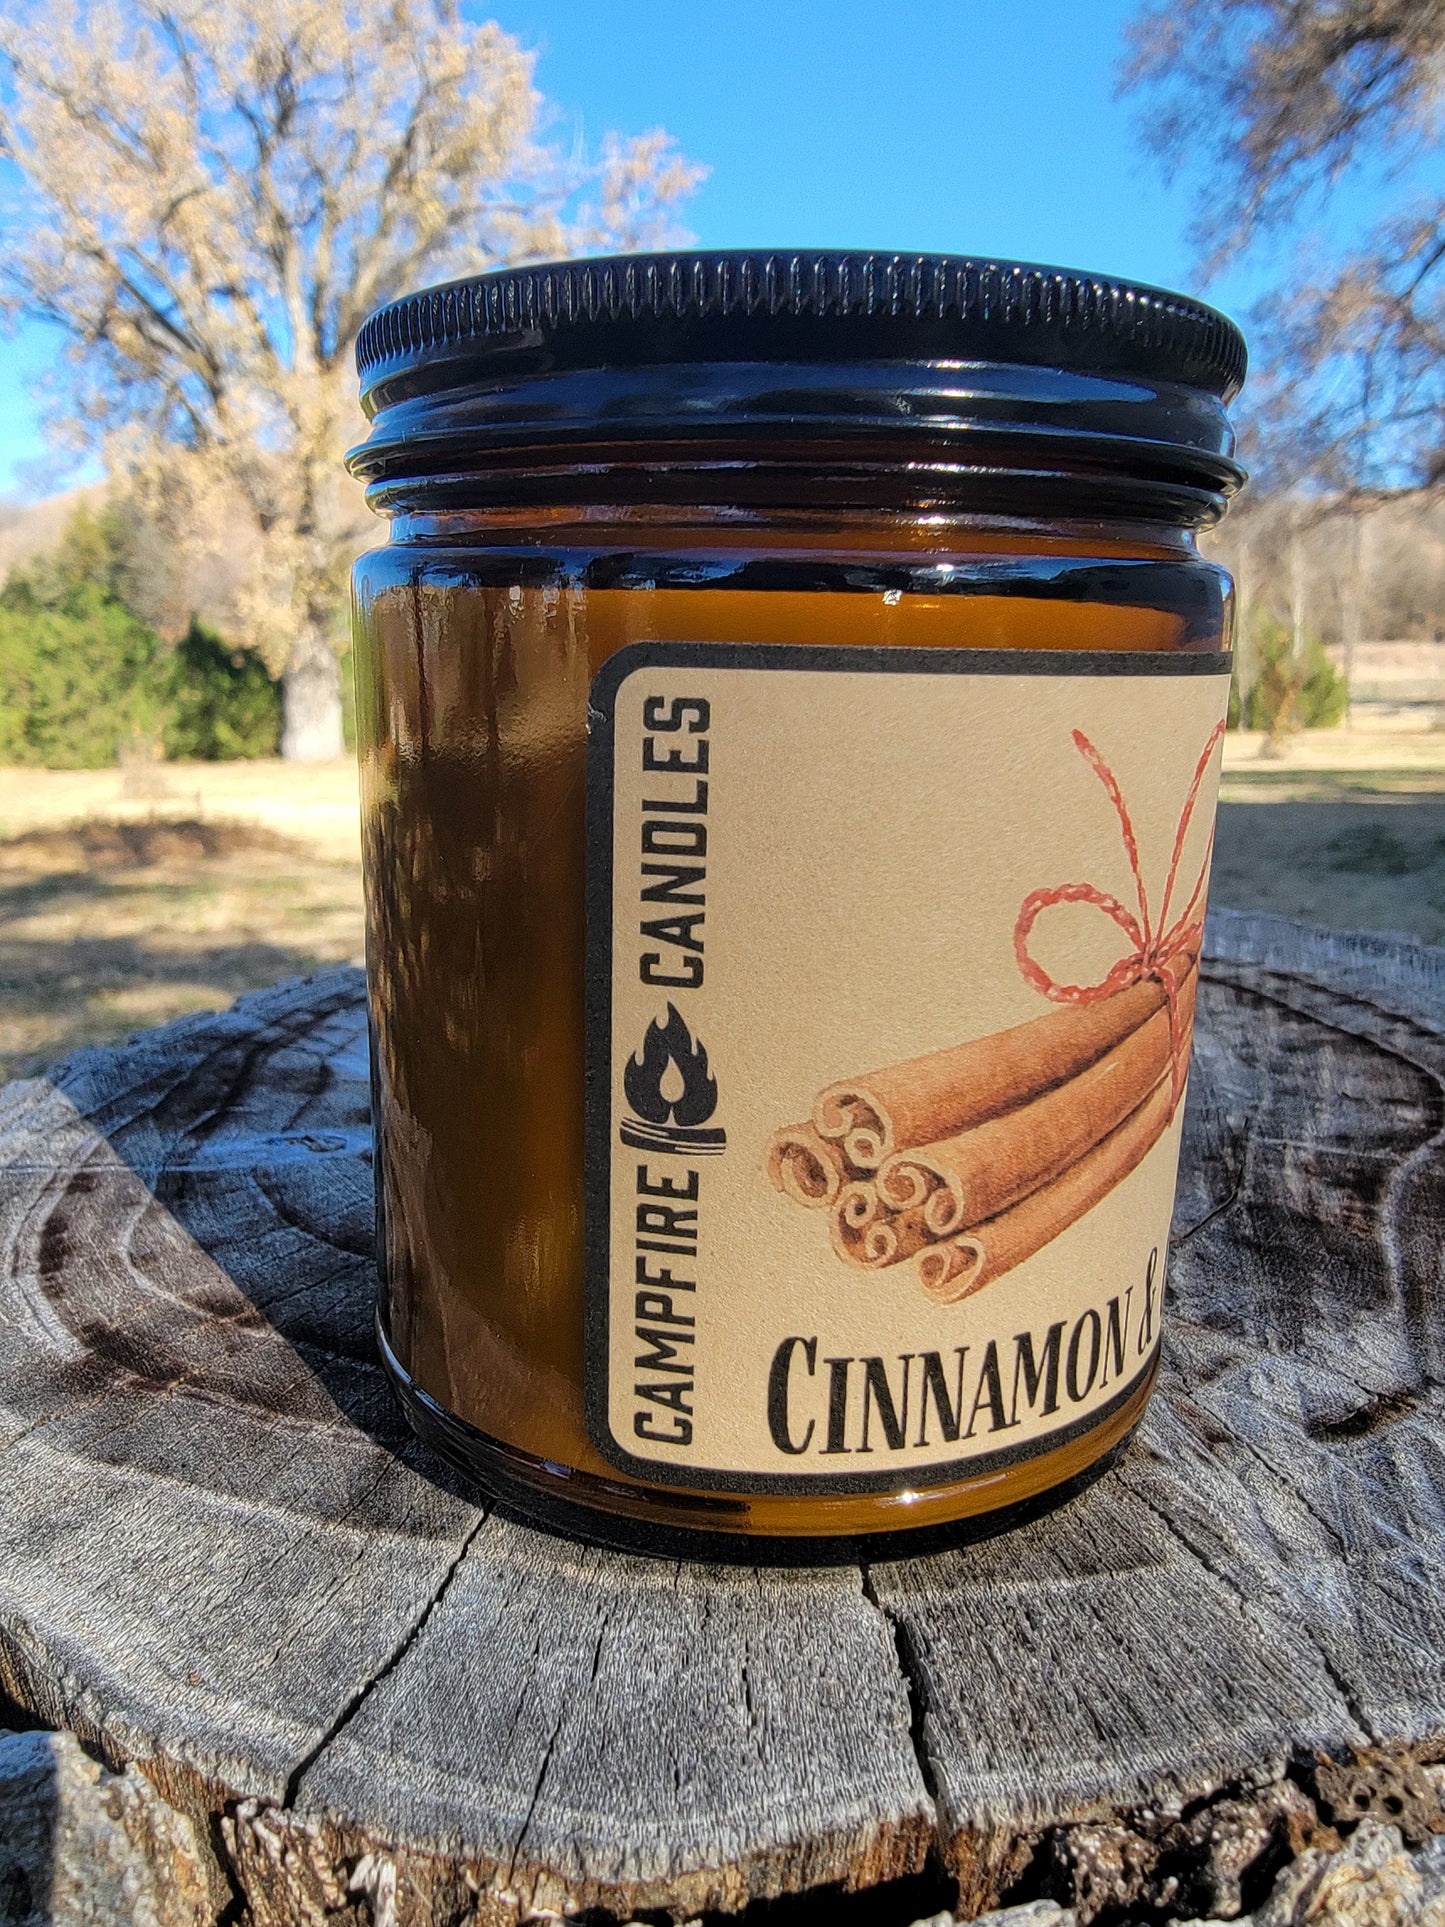 Cinnamon and Clove | Soy Candle with Wooden Wick | Campfire Candles